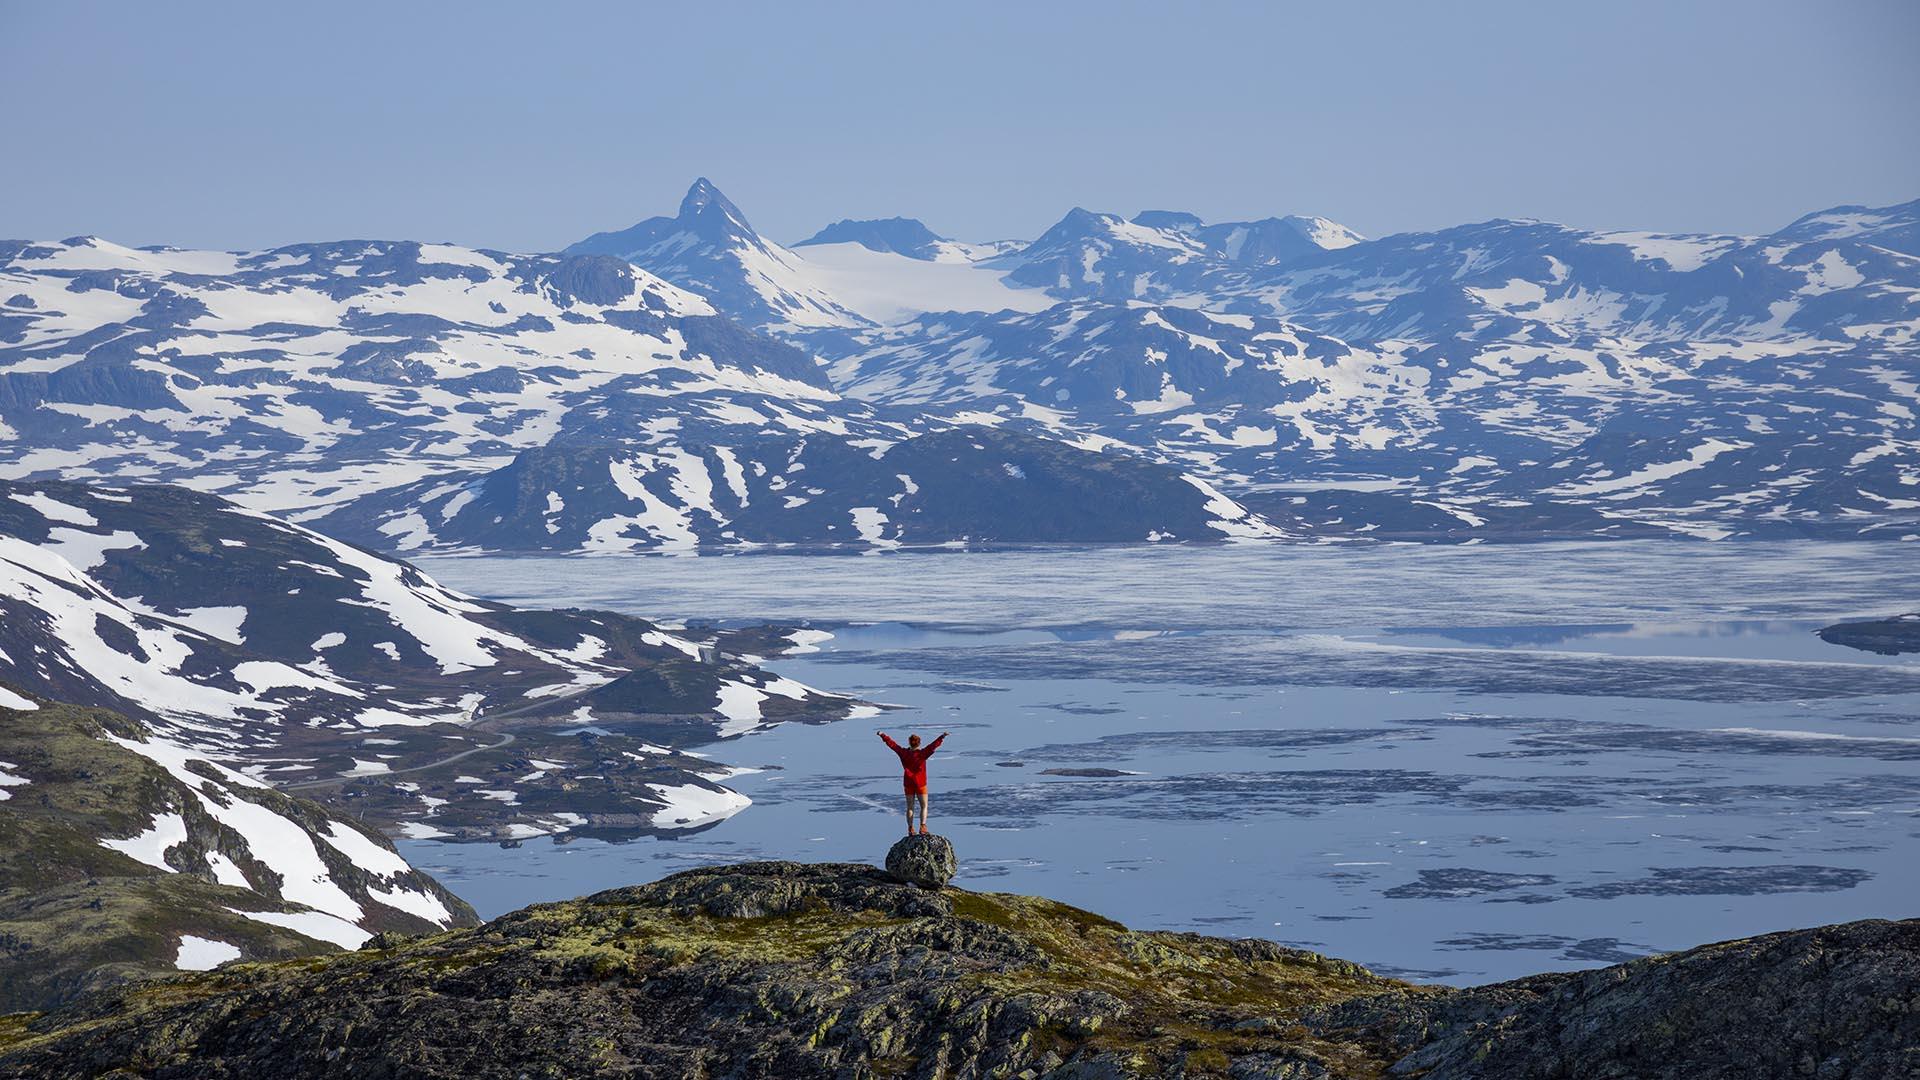 Far away a person stands on top of a rock enjoying view over a lake and snowspotted mountains in the distance.